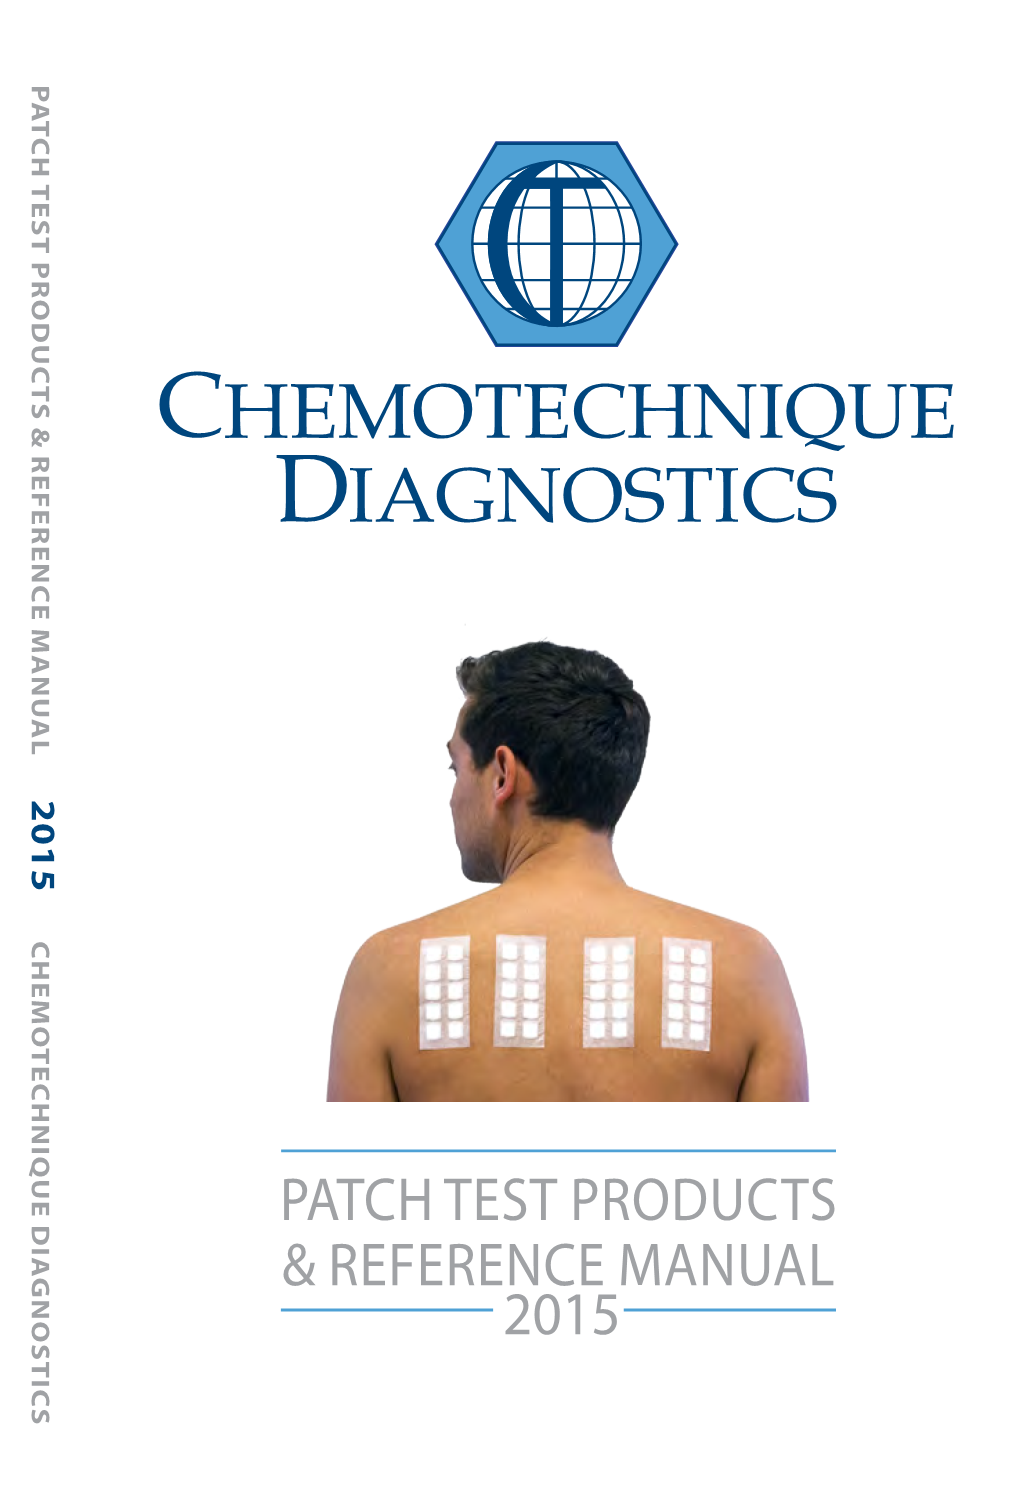 Patch Test Products and Reference Manual 2015